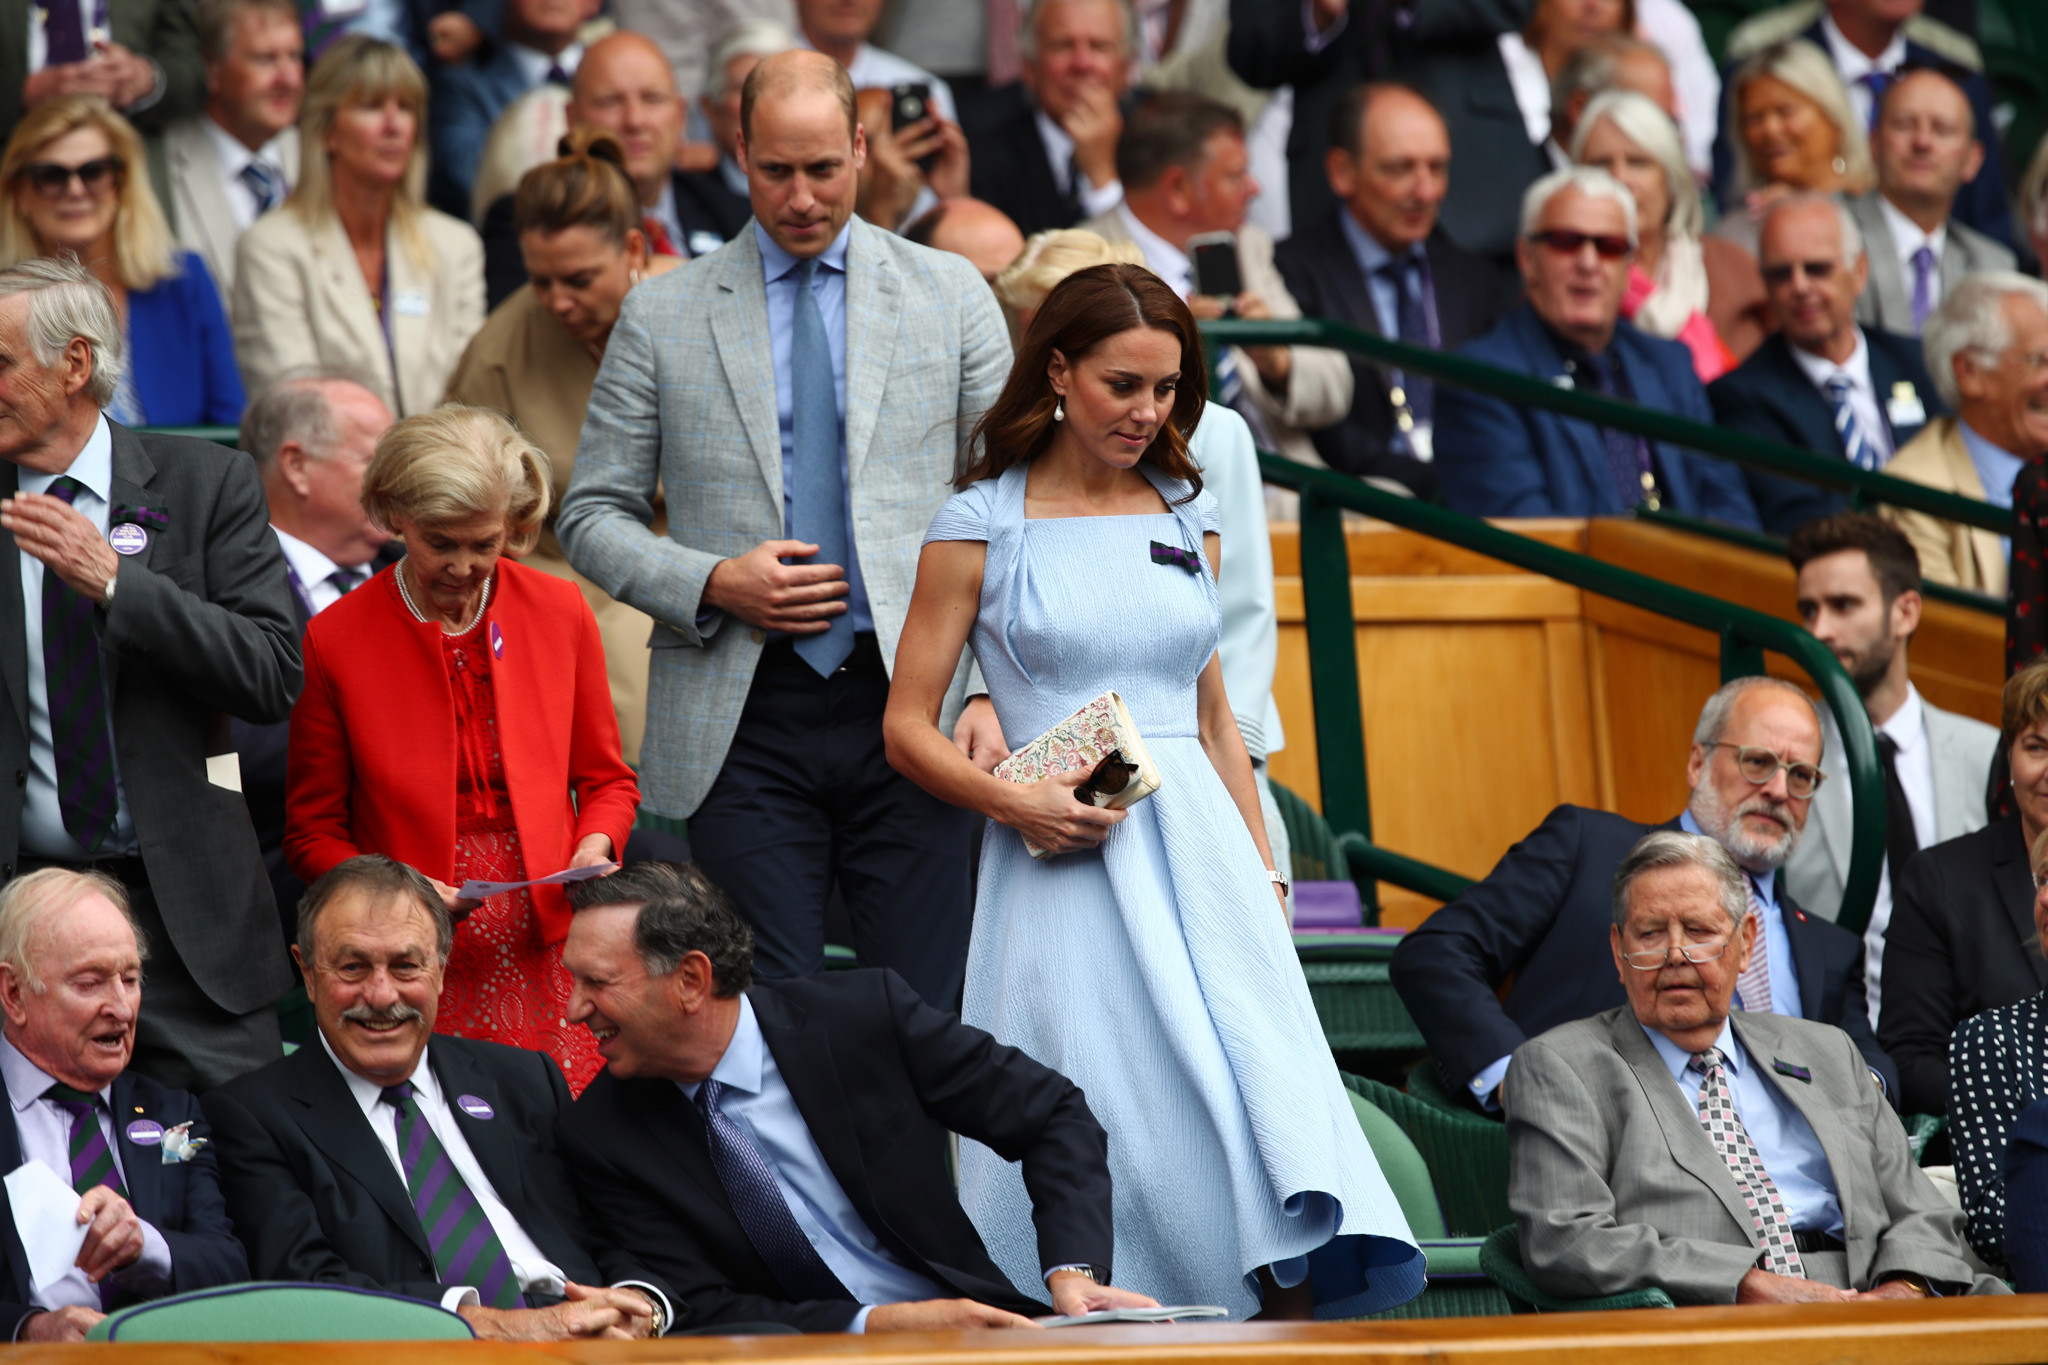 Catherine, Duchess of Cambridge and Prince William, Duke of Cambridge watched the contest from the Royal Box ©Getty Images